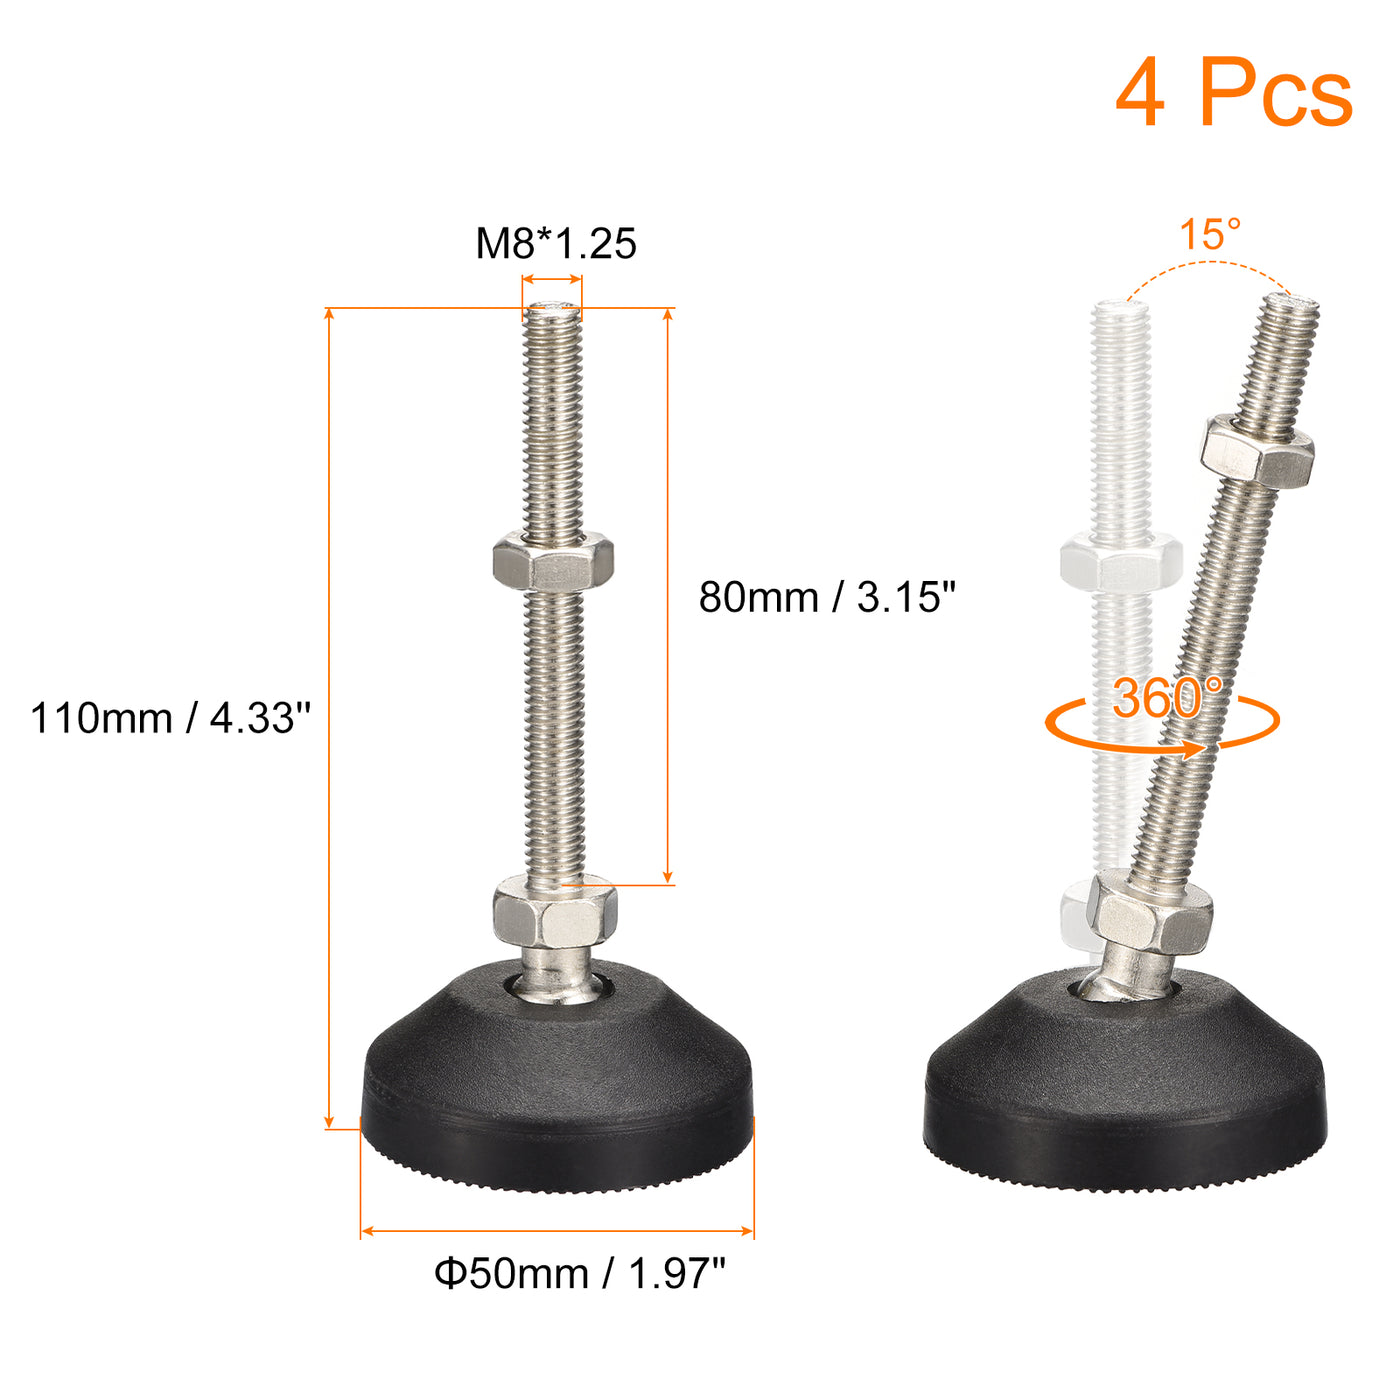 uxcell Uxcell Furniture Levelers, 4Pcs M8x80x50mm Nylon Universal Leveling Feet, Adjustable Swivel Table Feet for Furniture Workshop Machines Machinery Equipment